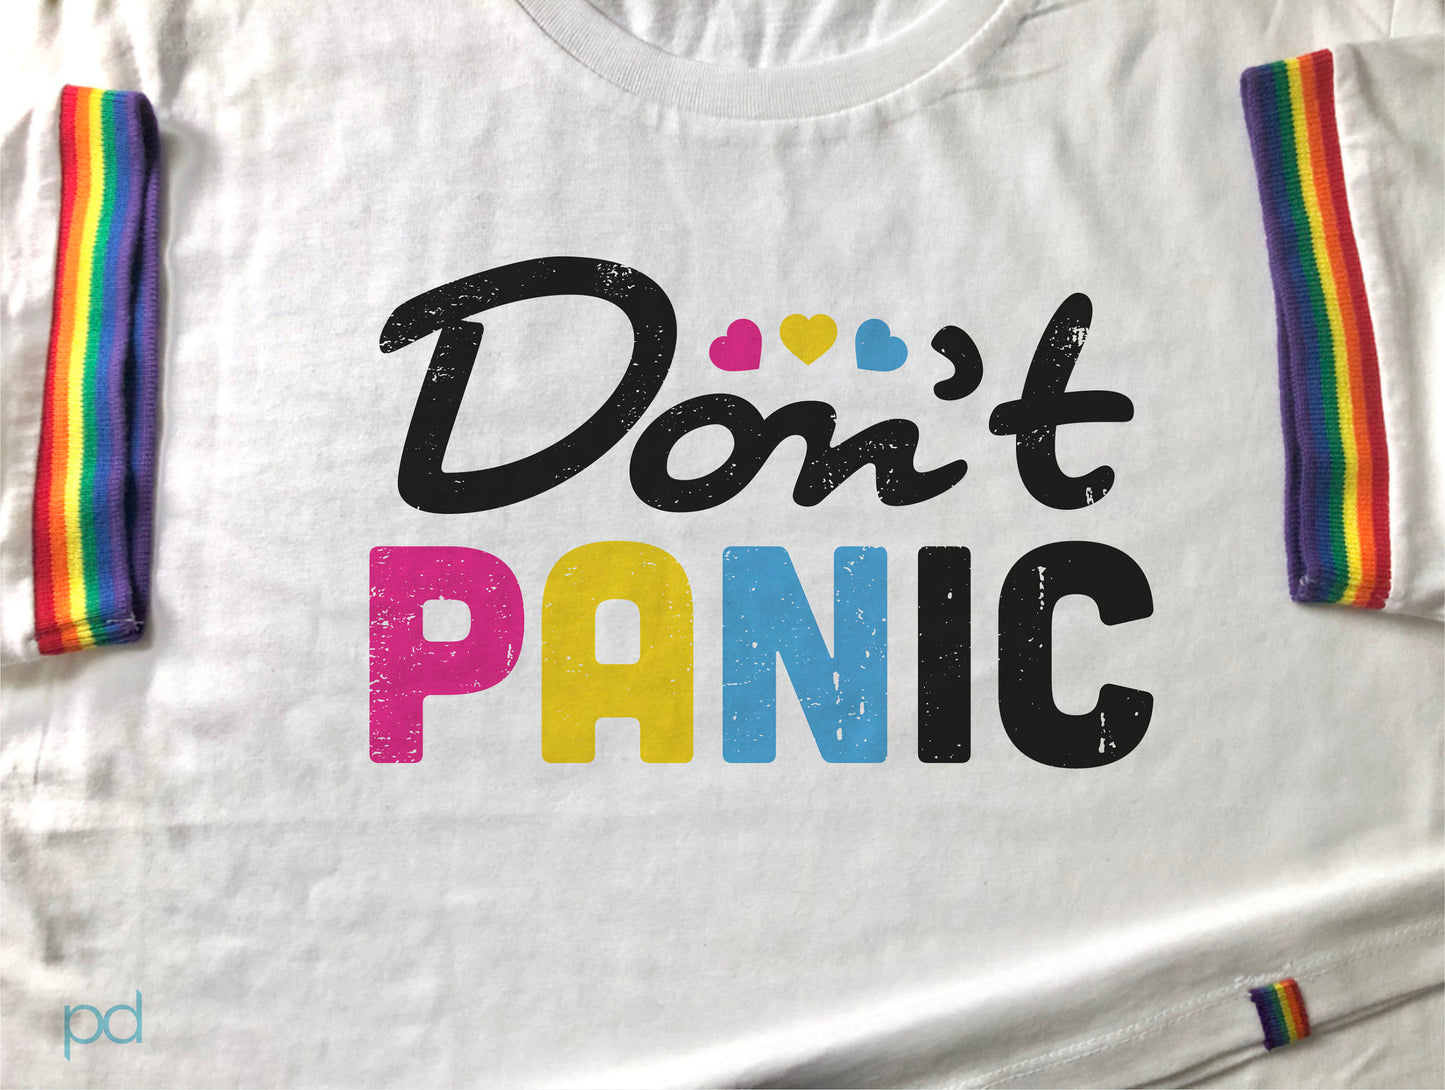 Don&#39;t Panic Rainbow T-Shirt, Pansexual Pan Pride Gift Idea, LGBTQ+ Pansexuality Support Graphic Print Design Tee Shirt Top